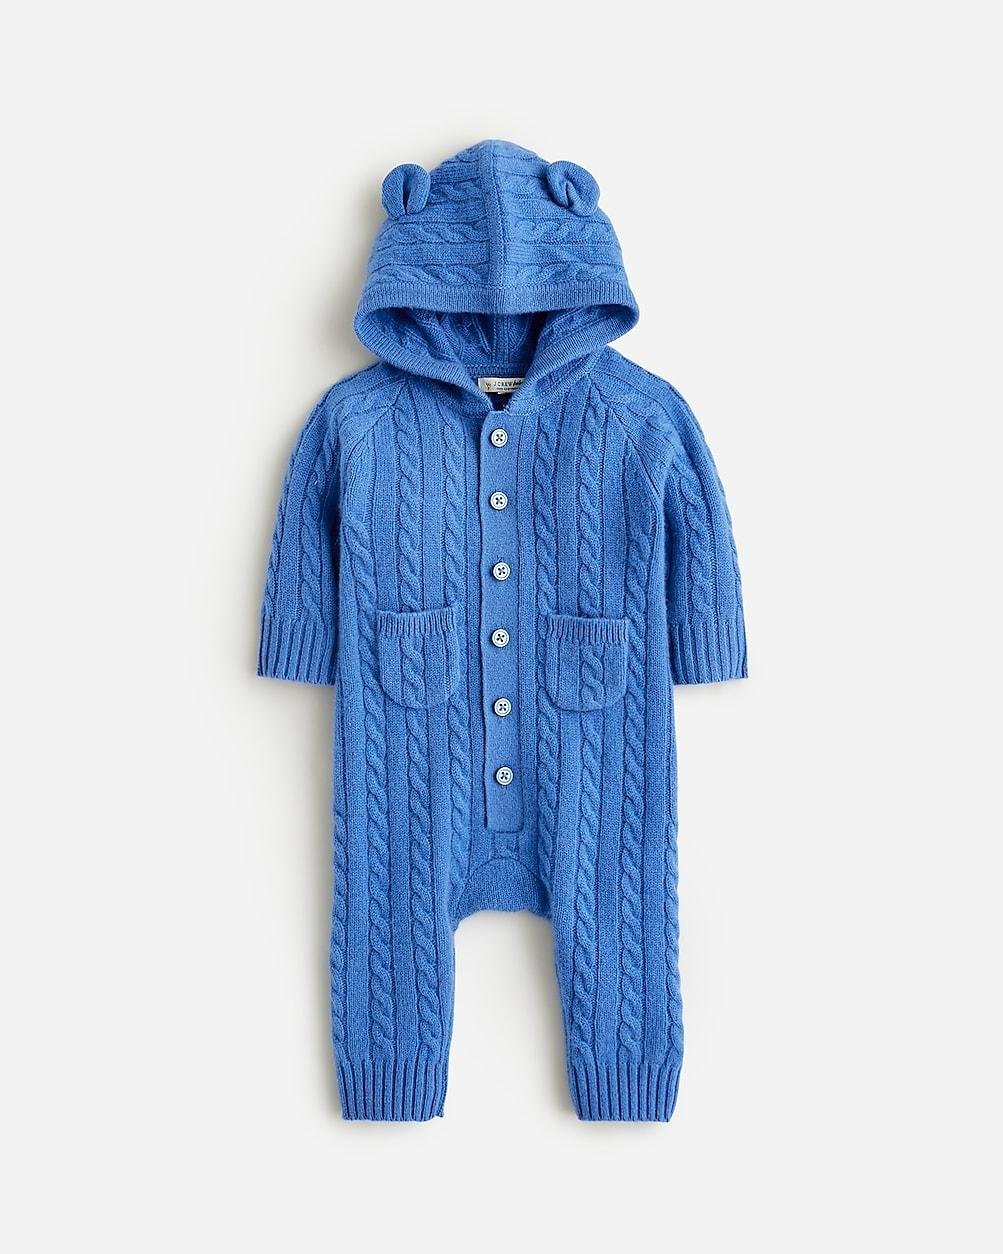 Limited-edition baby cashmere cable-knit bear one-piece by J.CREW